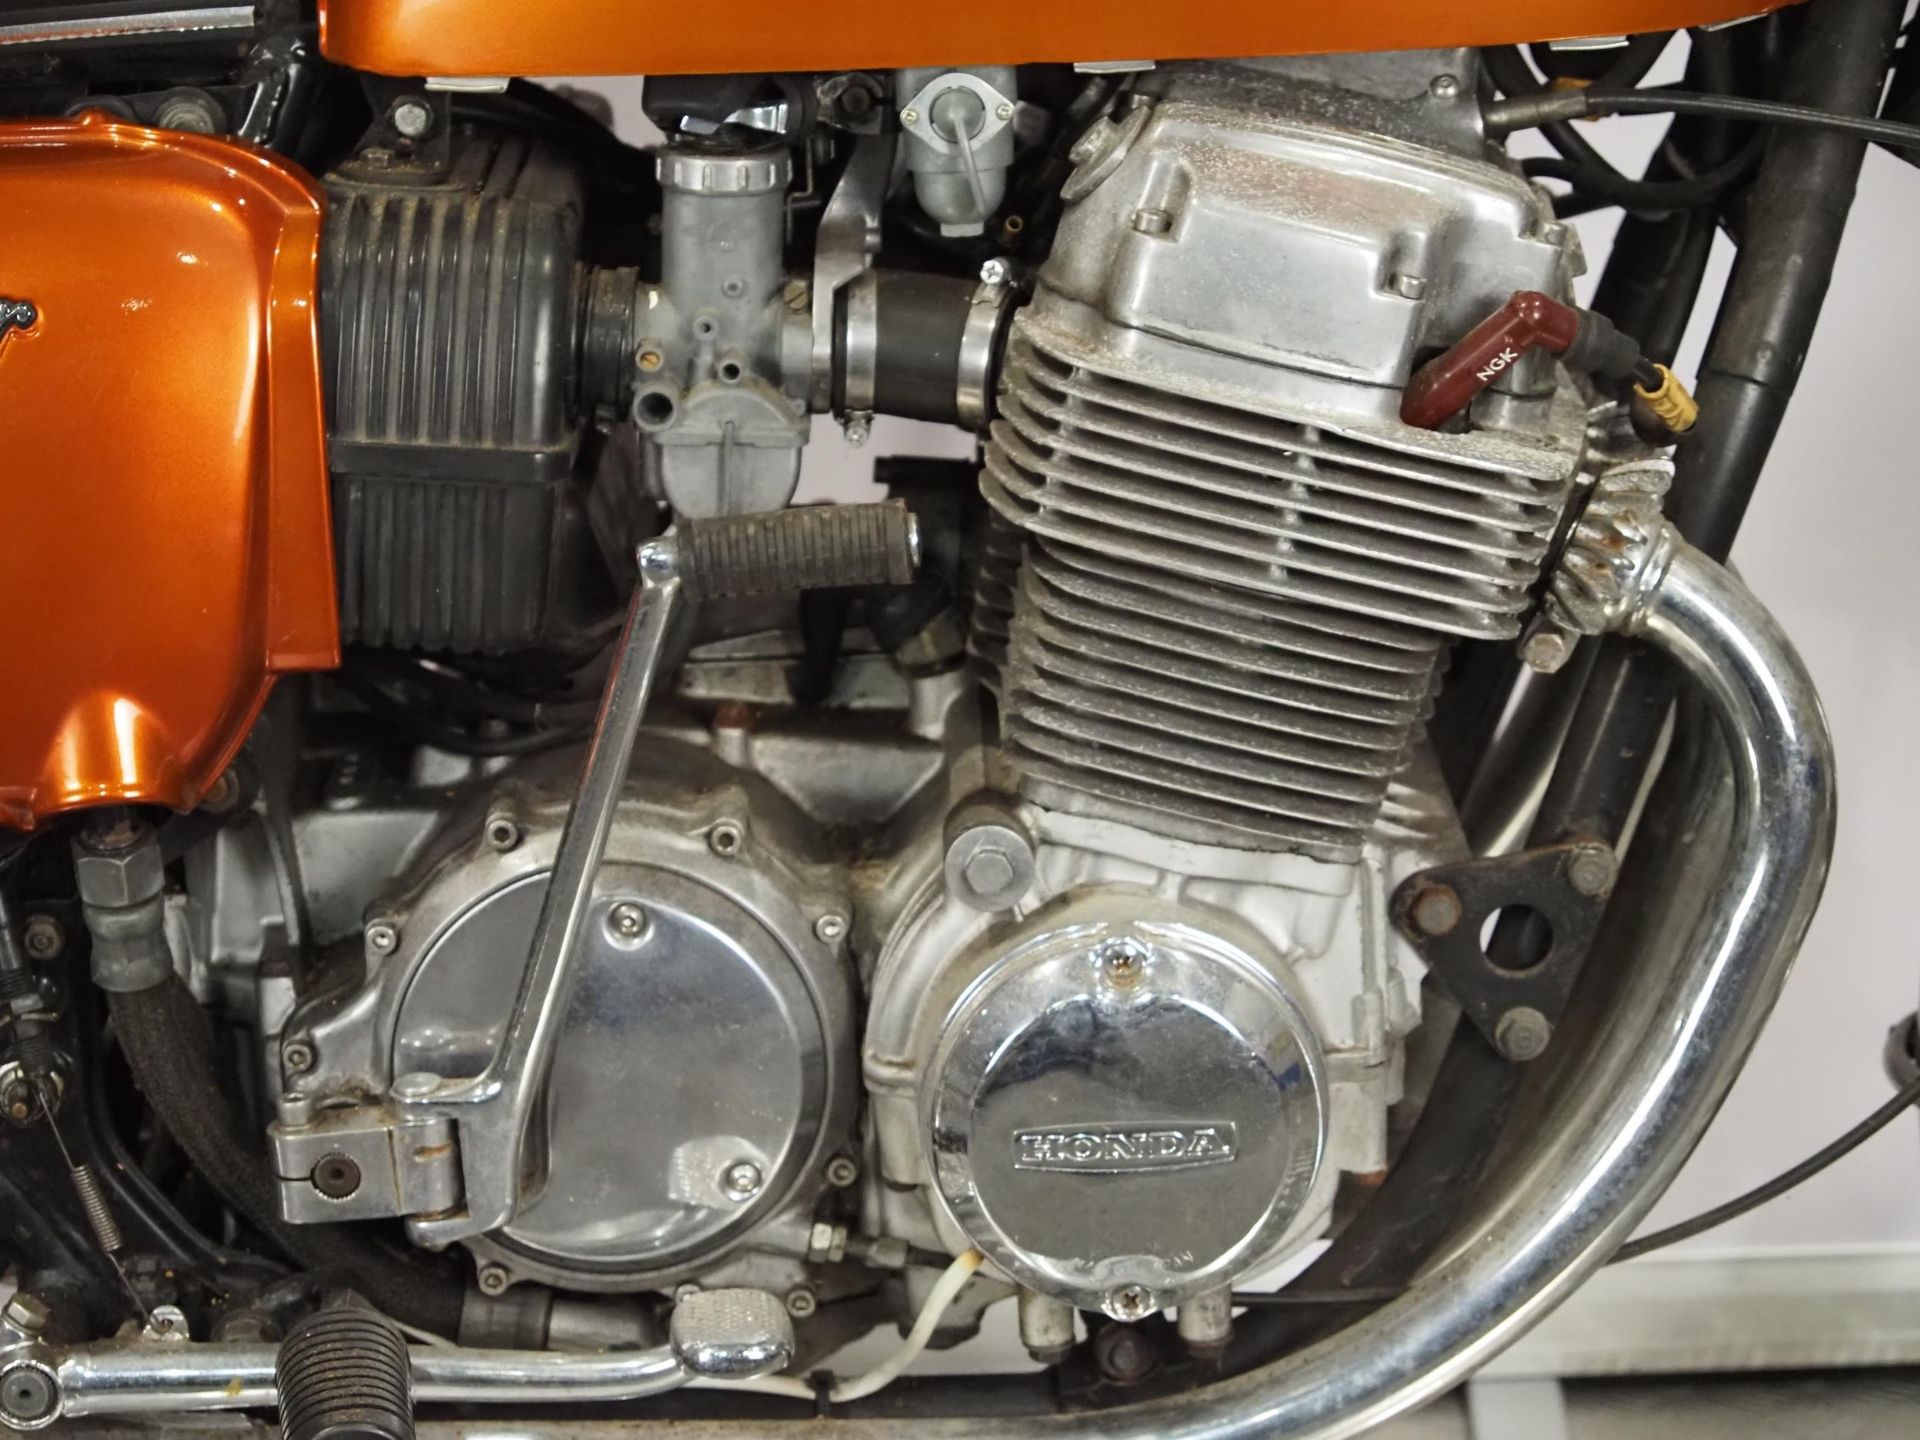 Honda 750 Four motorcycle. 1972. 736cc. Frame No. 2024351 Engine No. 2031888 Engine turns over but - Image 5 of 7